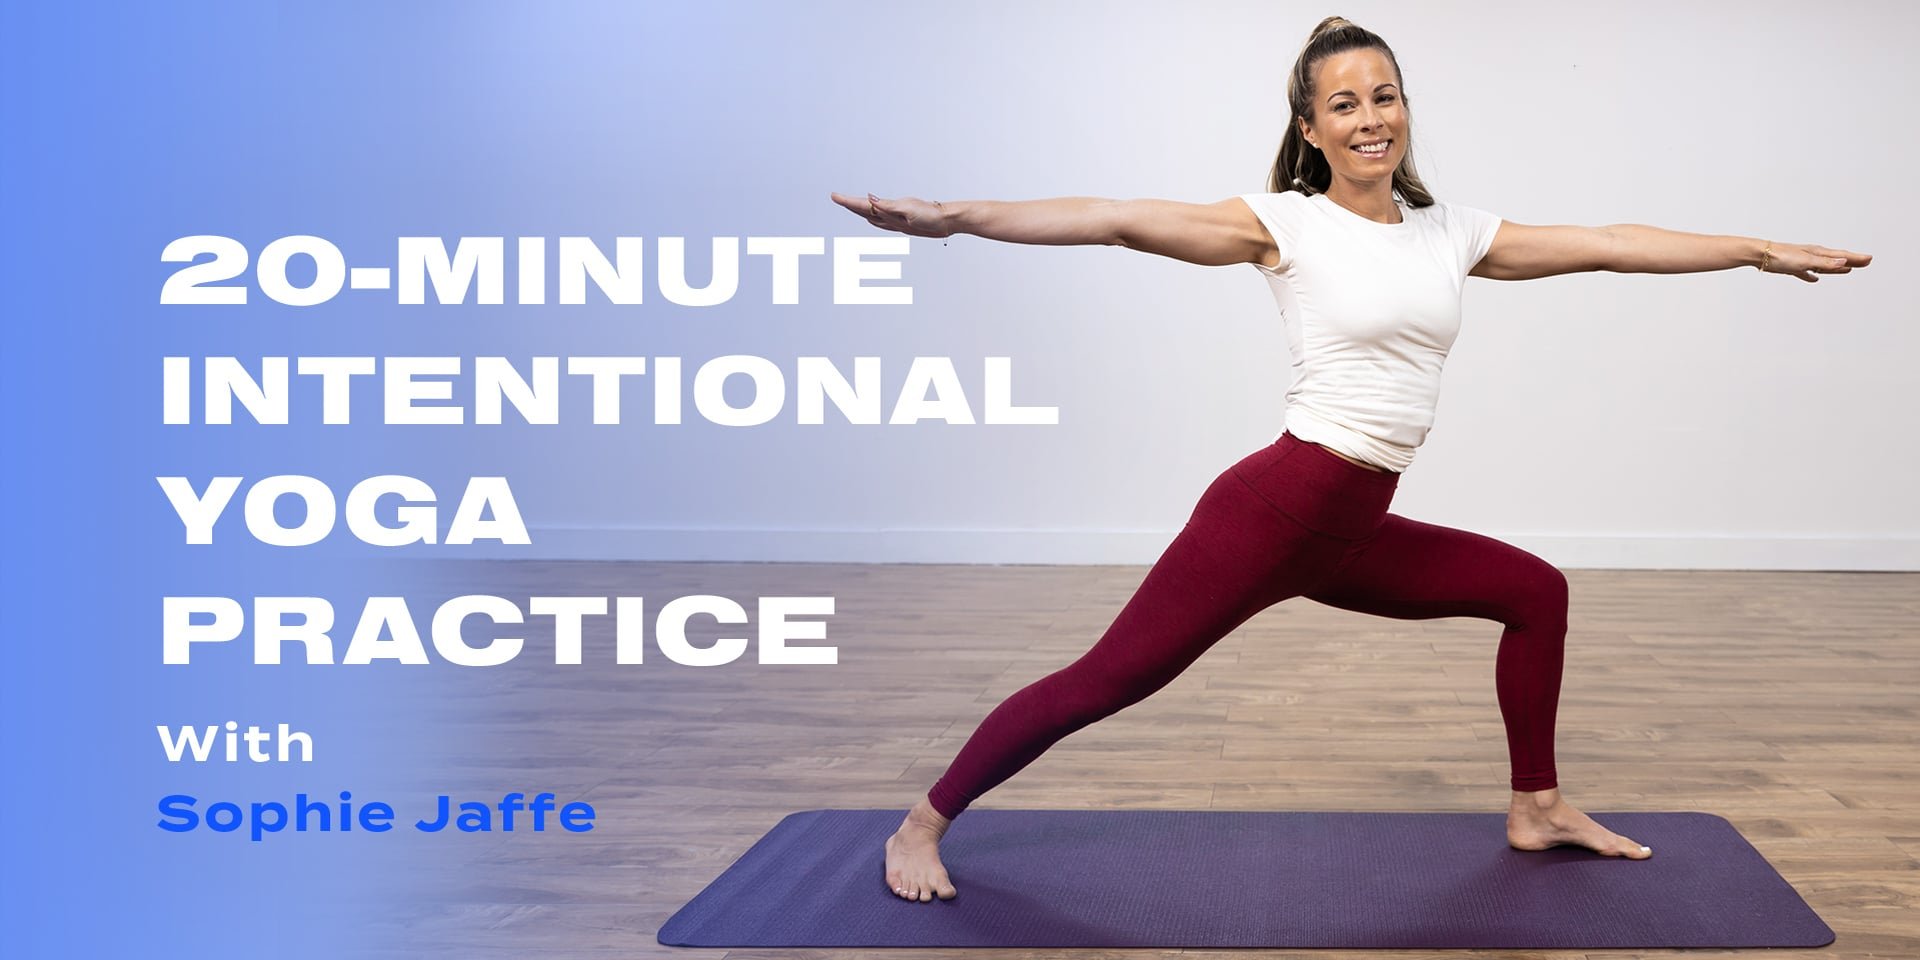 20-Minute Intentional Yoga Practice With Sophie Jaffe